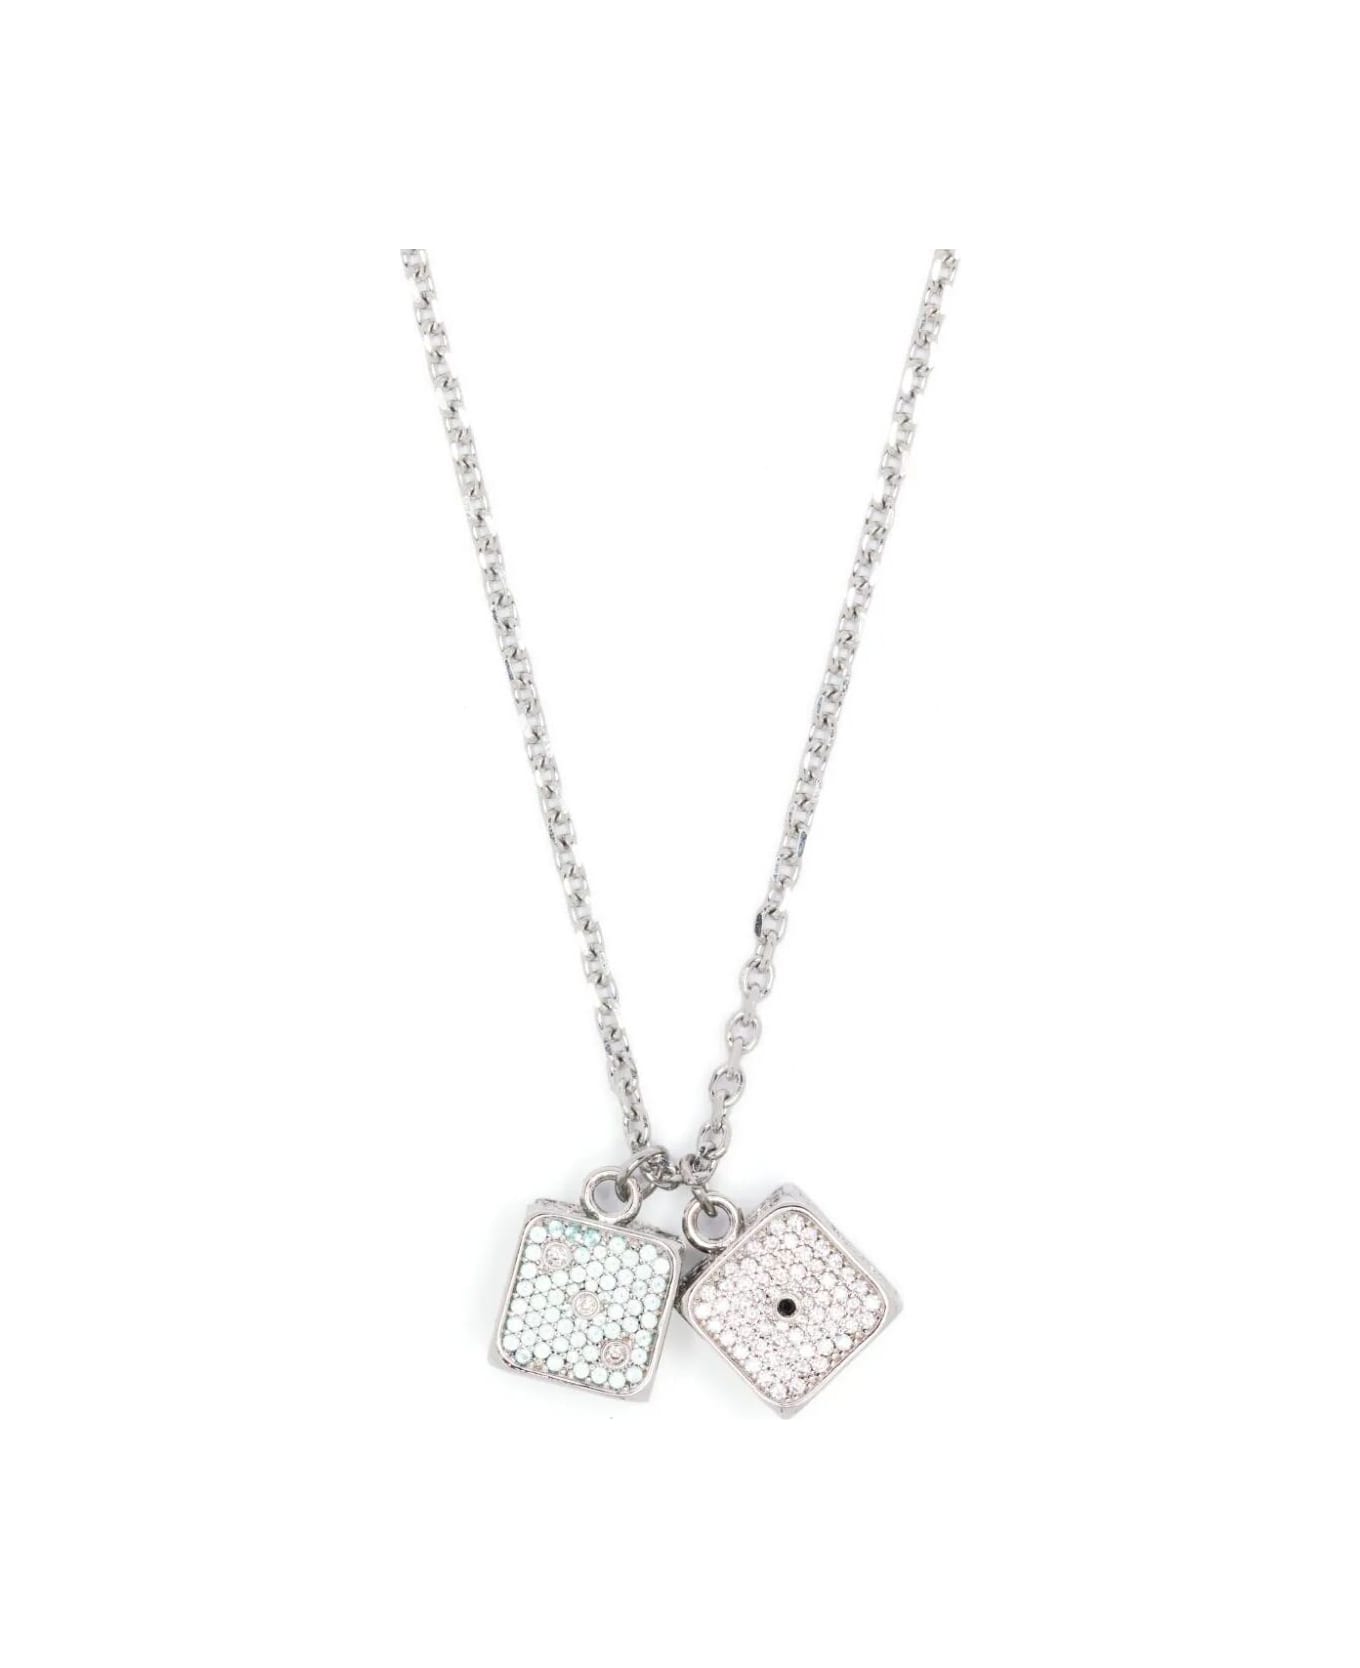 Darkai Dices Necklace - White ネックレス